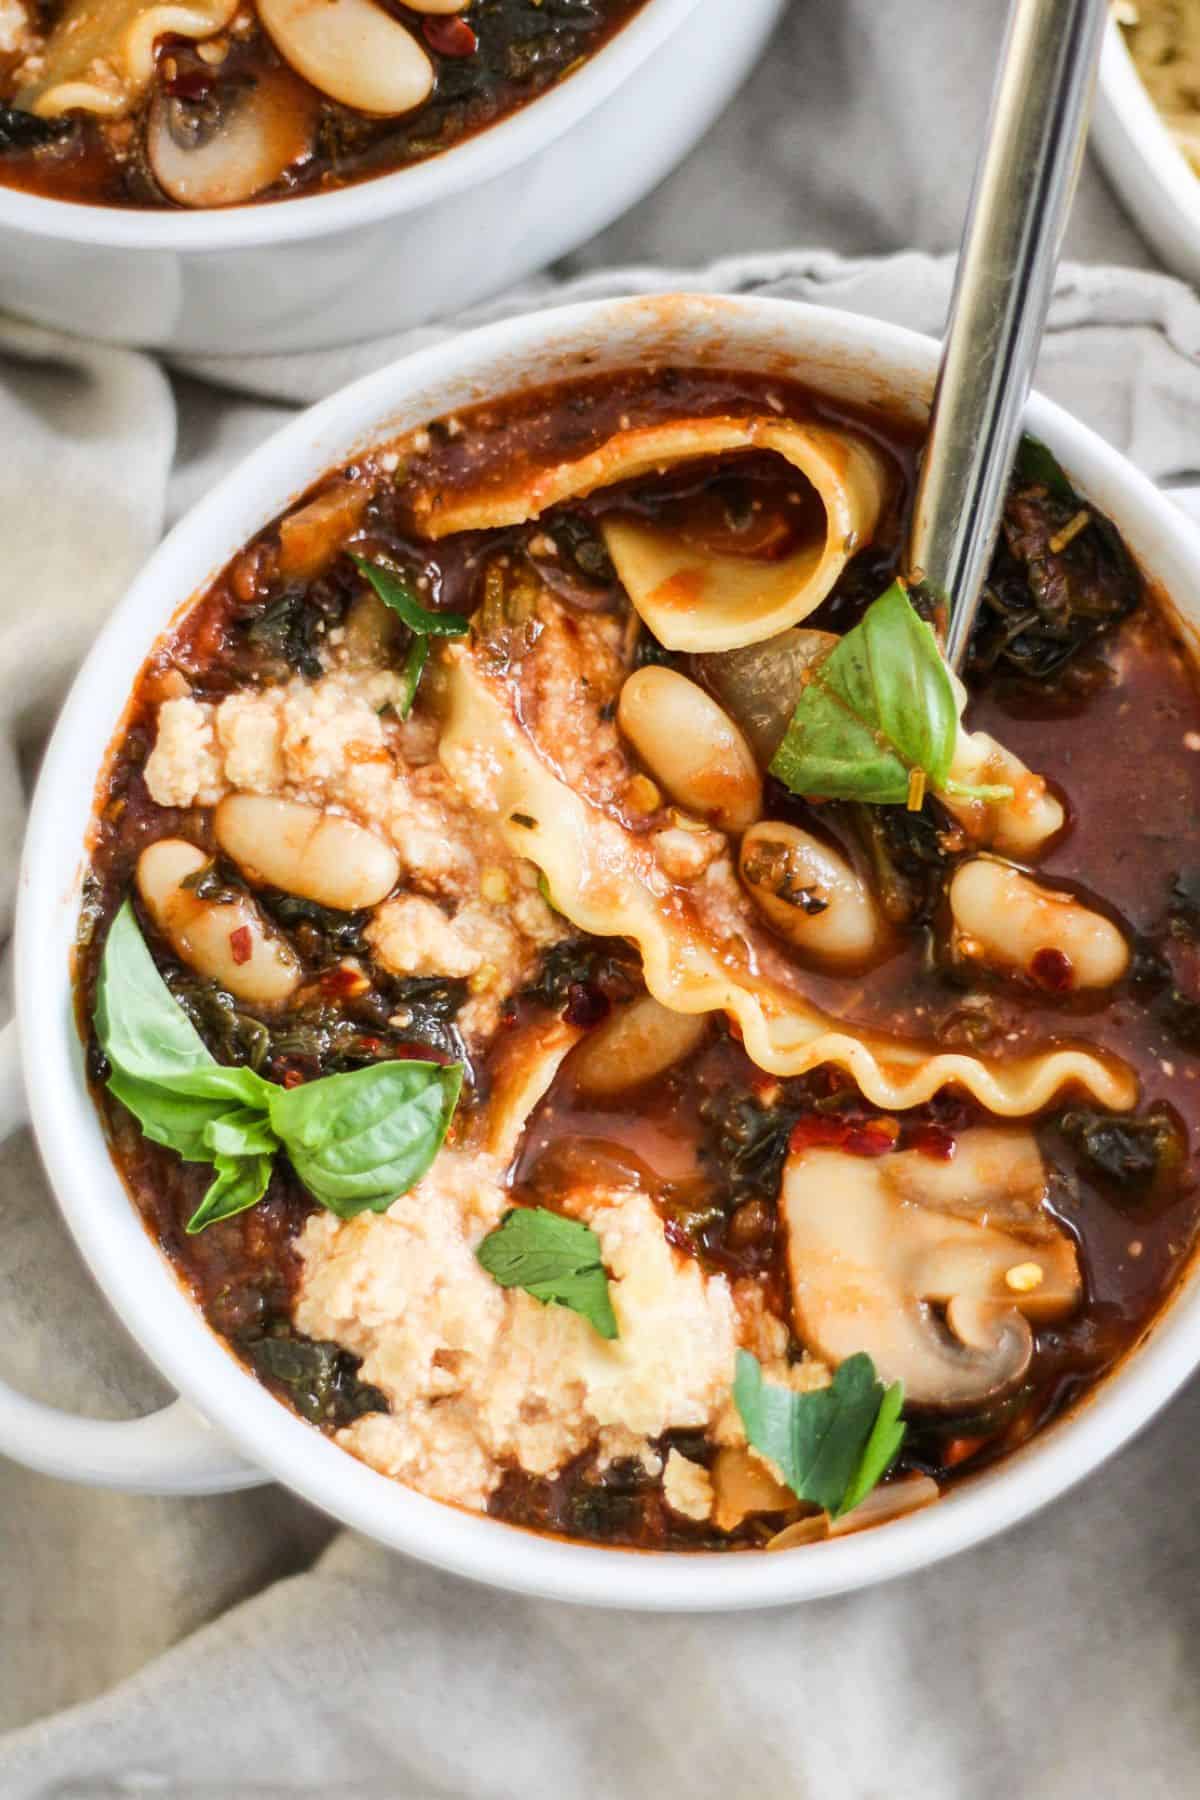 Vegan Lasagna Soup with white beans, mushrooms, and plant-based ricotta cheese.